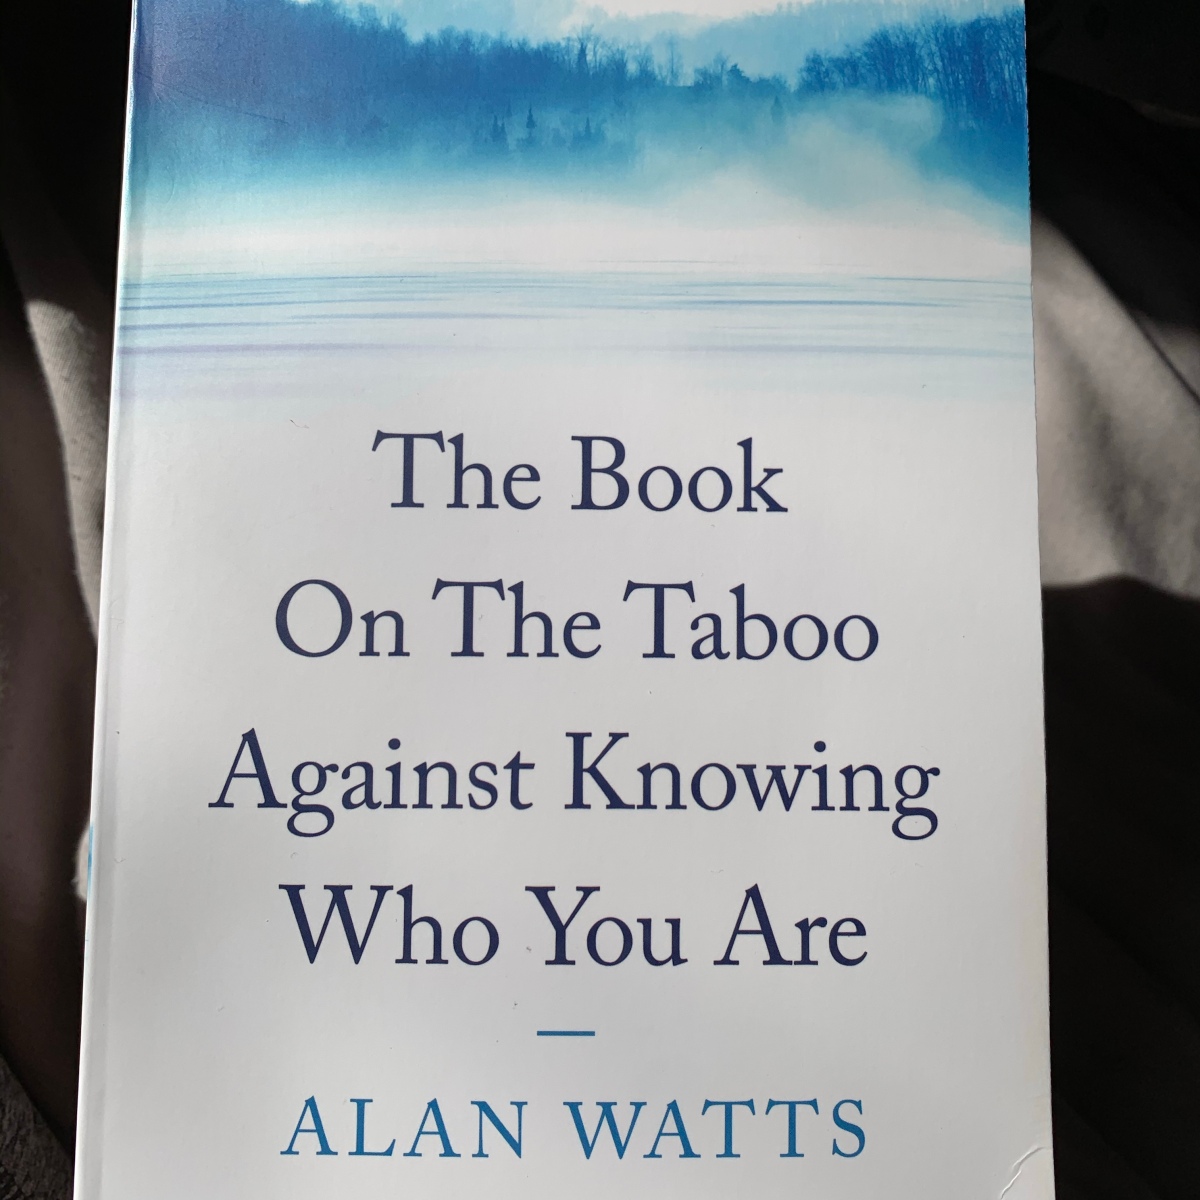 ‘The Book On The Taboo Against Knowing Who You Are’ by Alan Watts